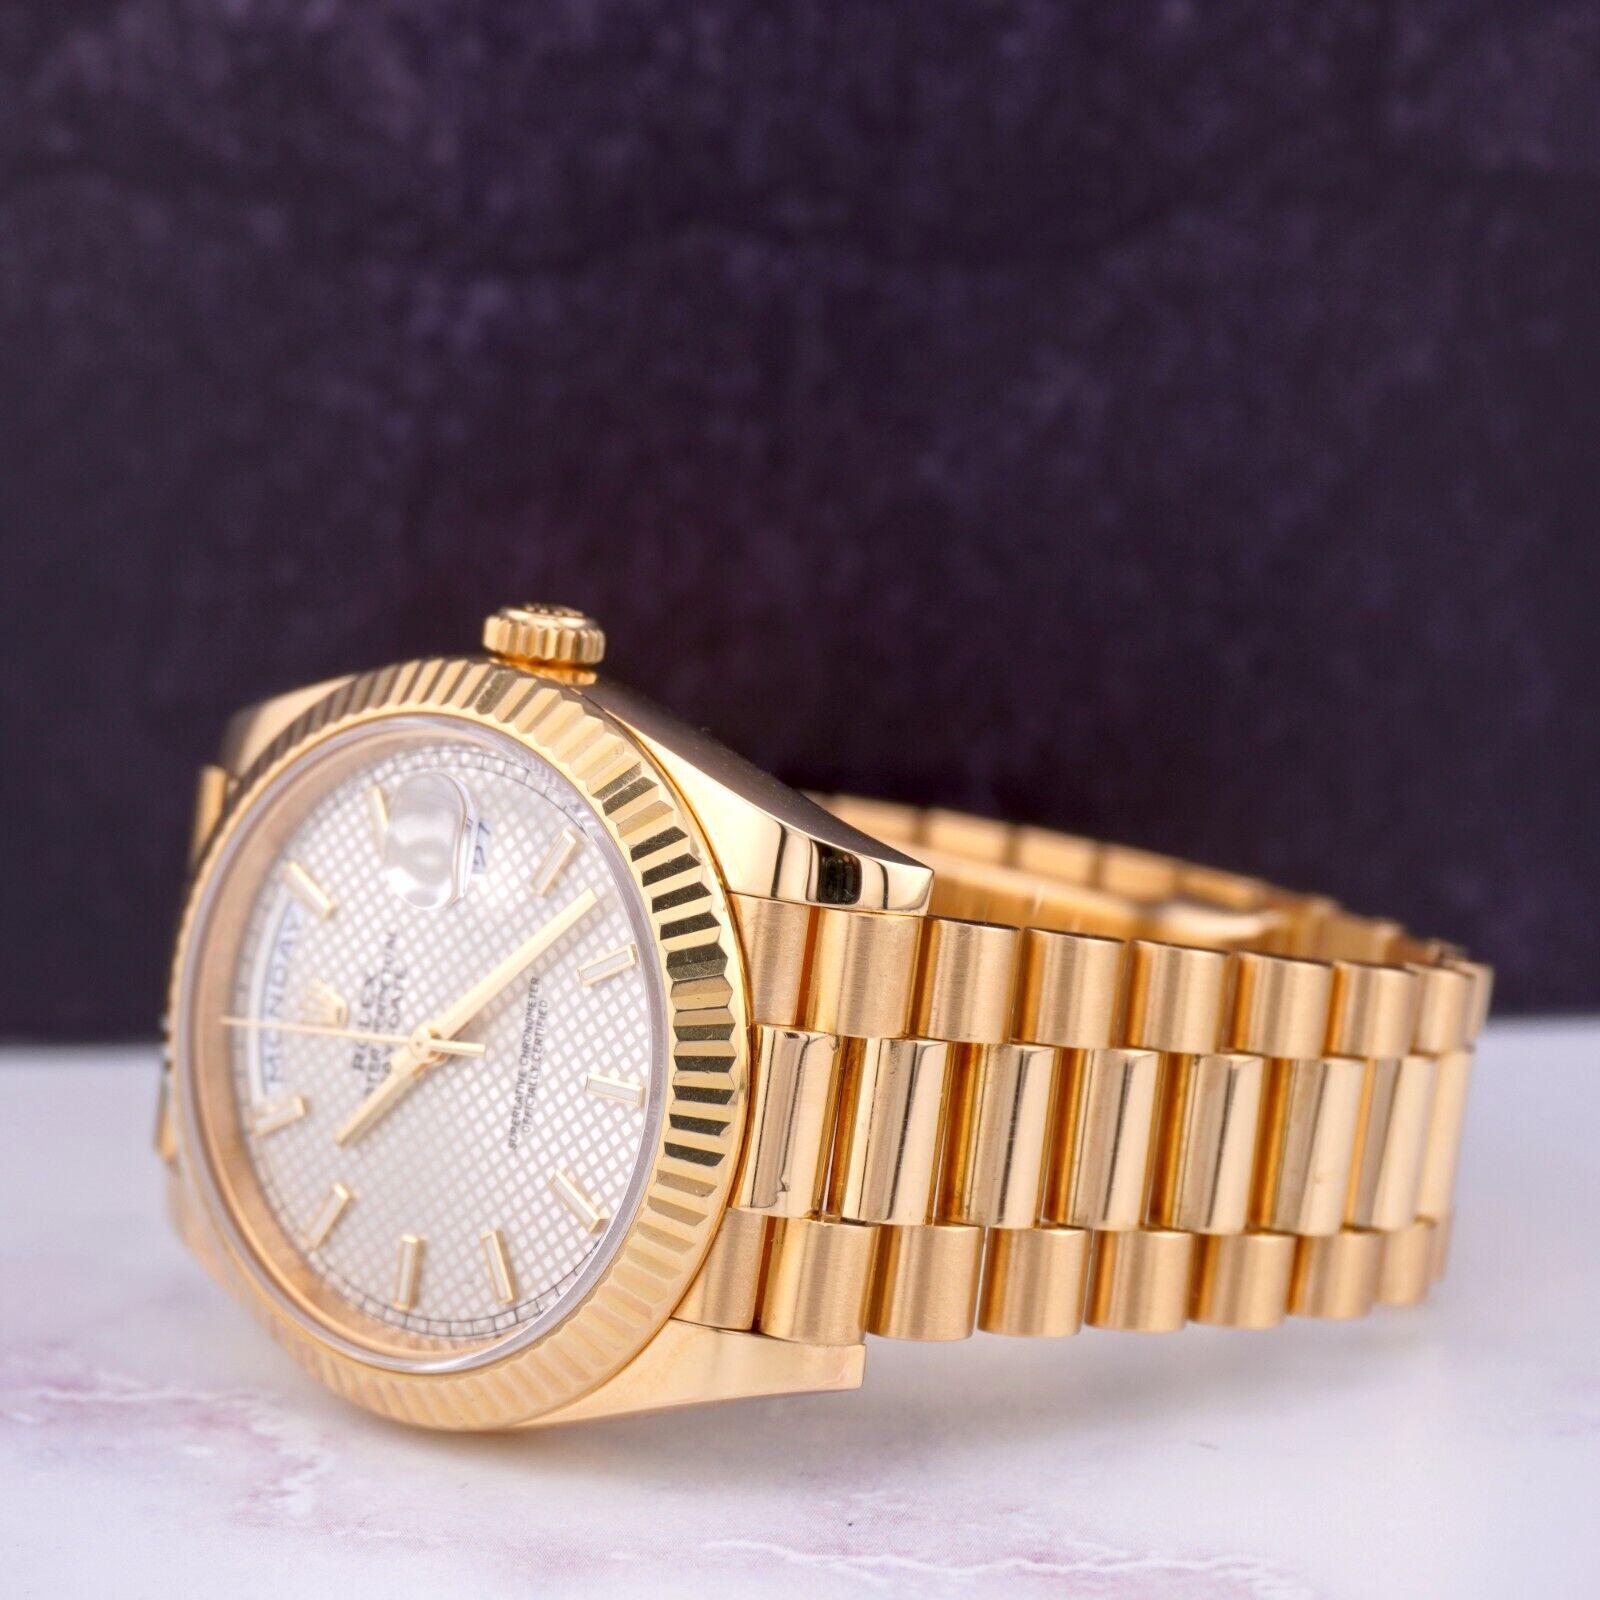 Rolex Day-Date 40 President 18k Yellow Gold Men's Watch Silver Motif DIAL 228238 In Excellent Condition For Sale In Pleasanton, CA